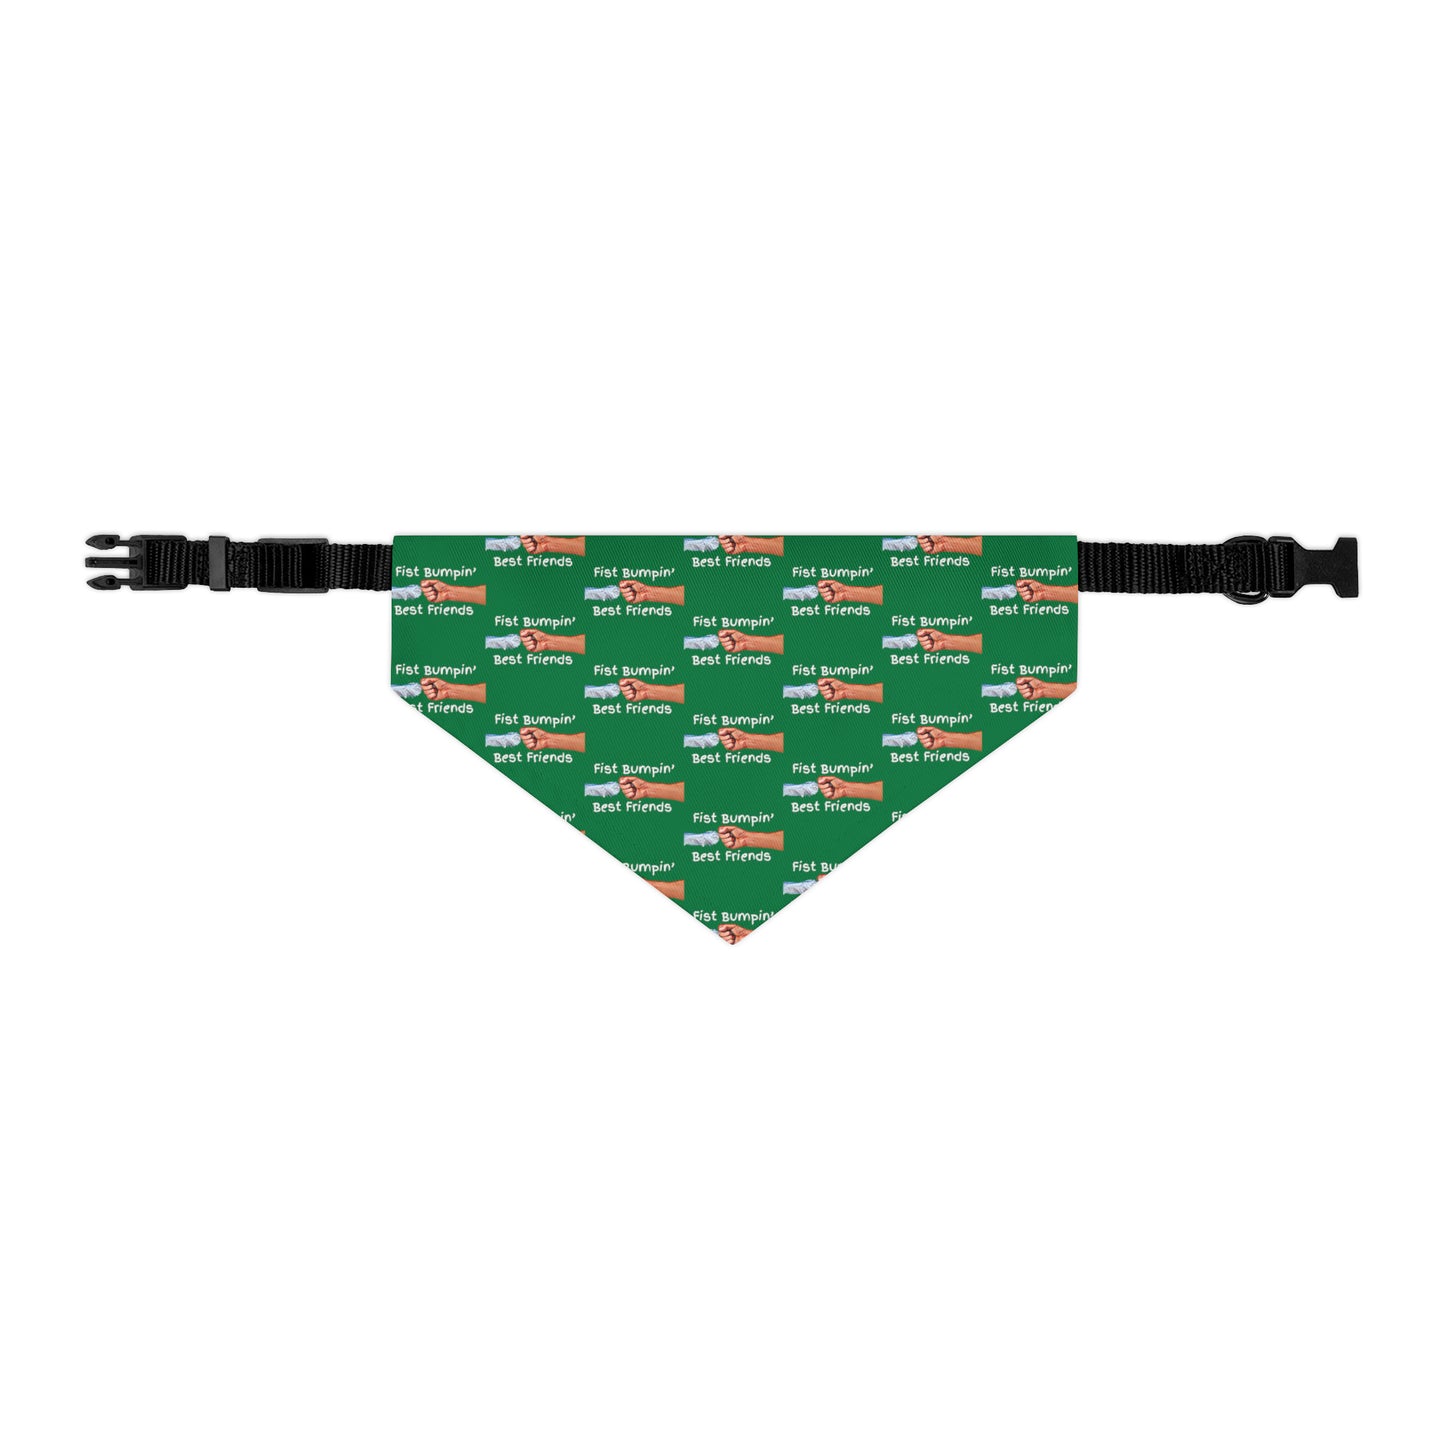 Fist Bumpin’ Best Friends Opie’s Cavalier King Charles Spaniel Pet Bandana Collar Green with White lettering.